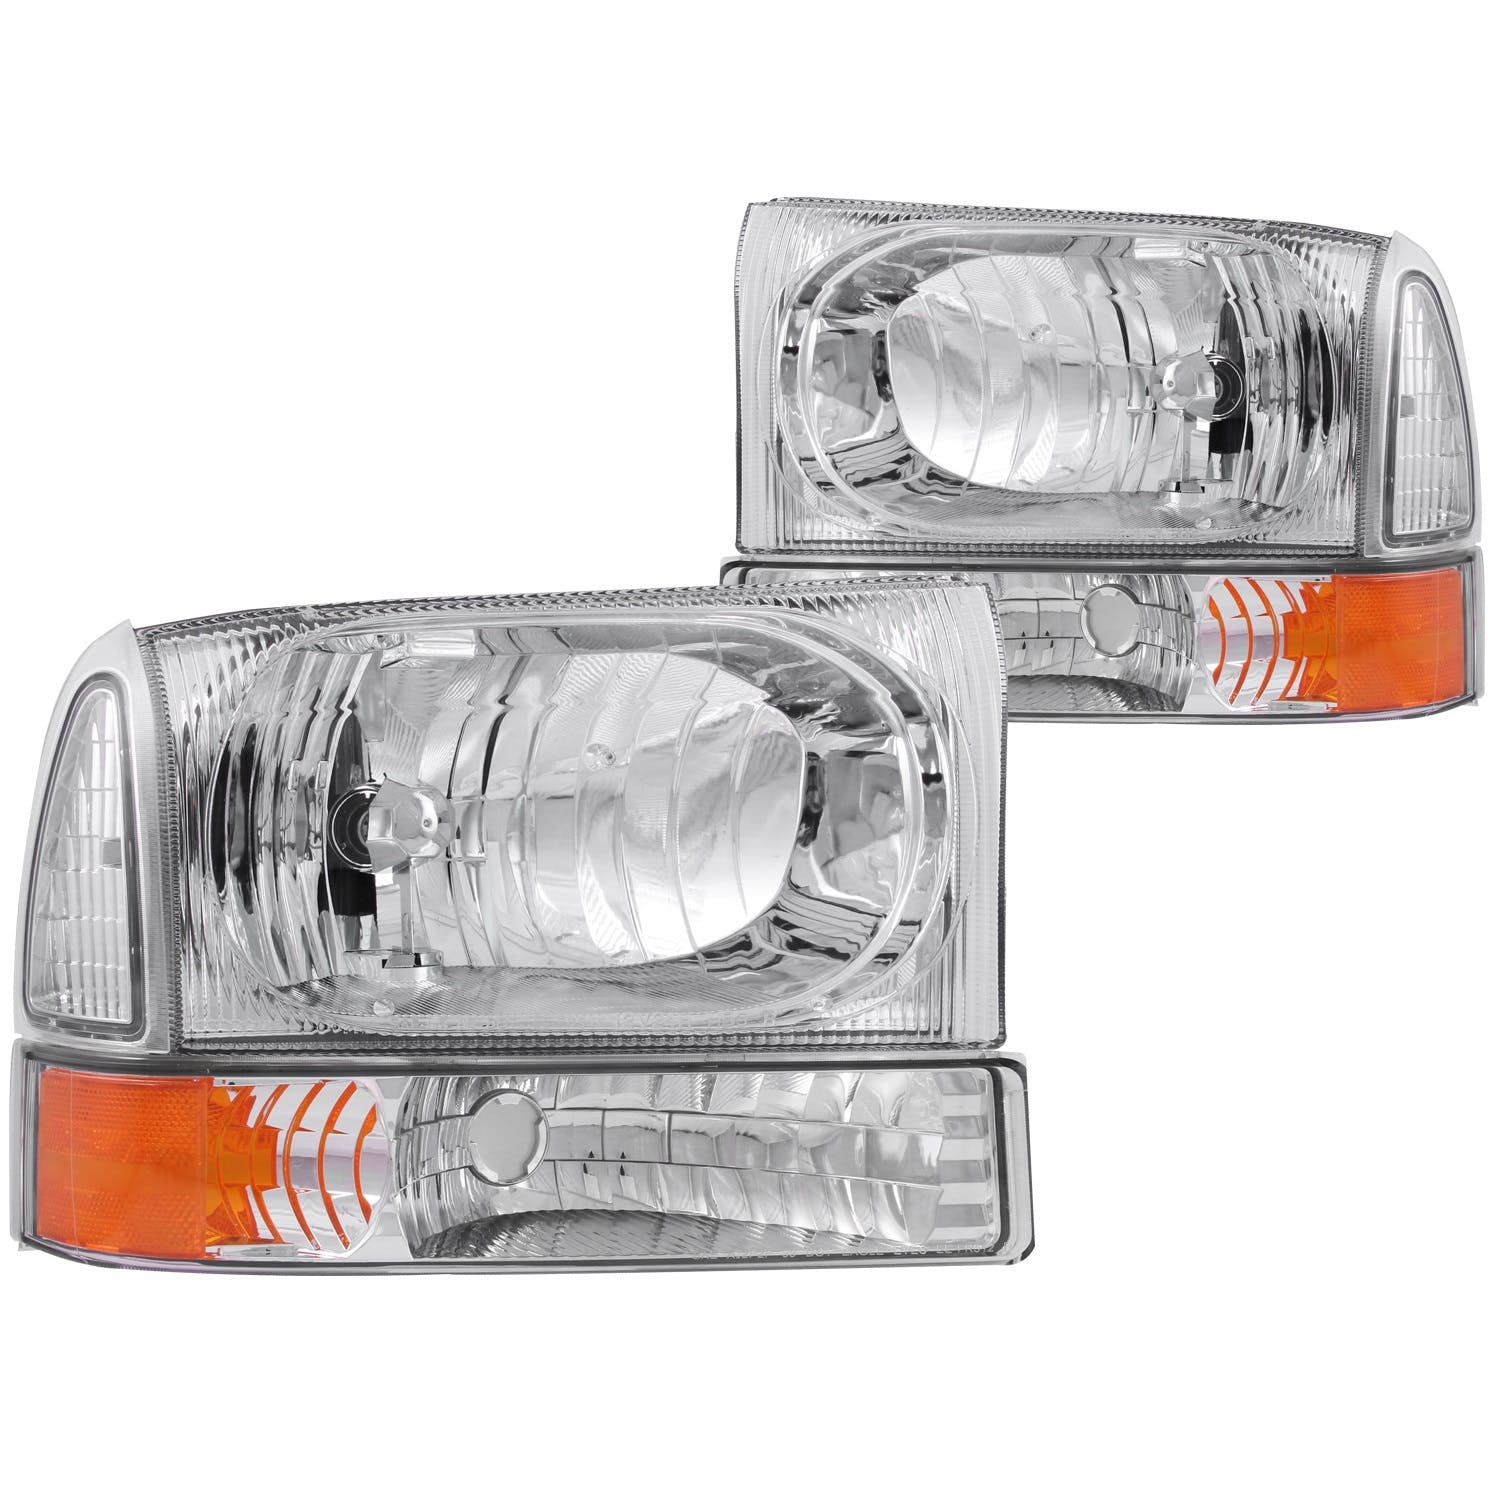 AnzoUSA 111081 Crystal Headlights Chrome with LED 1pc